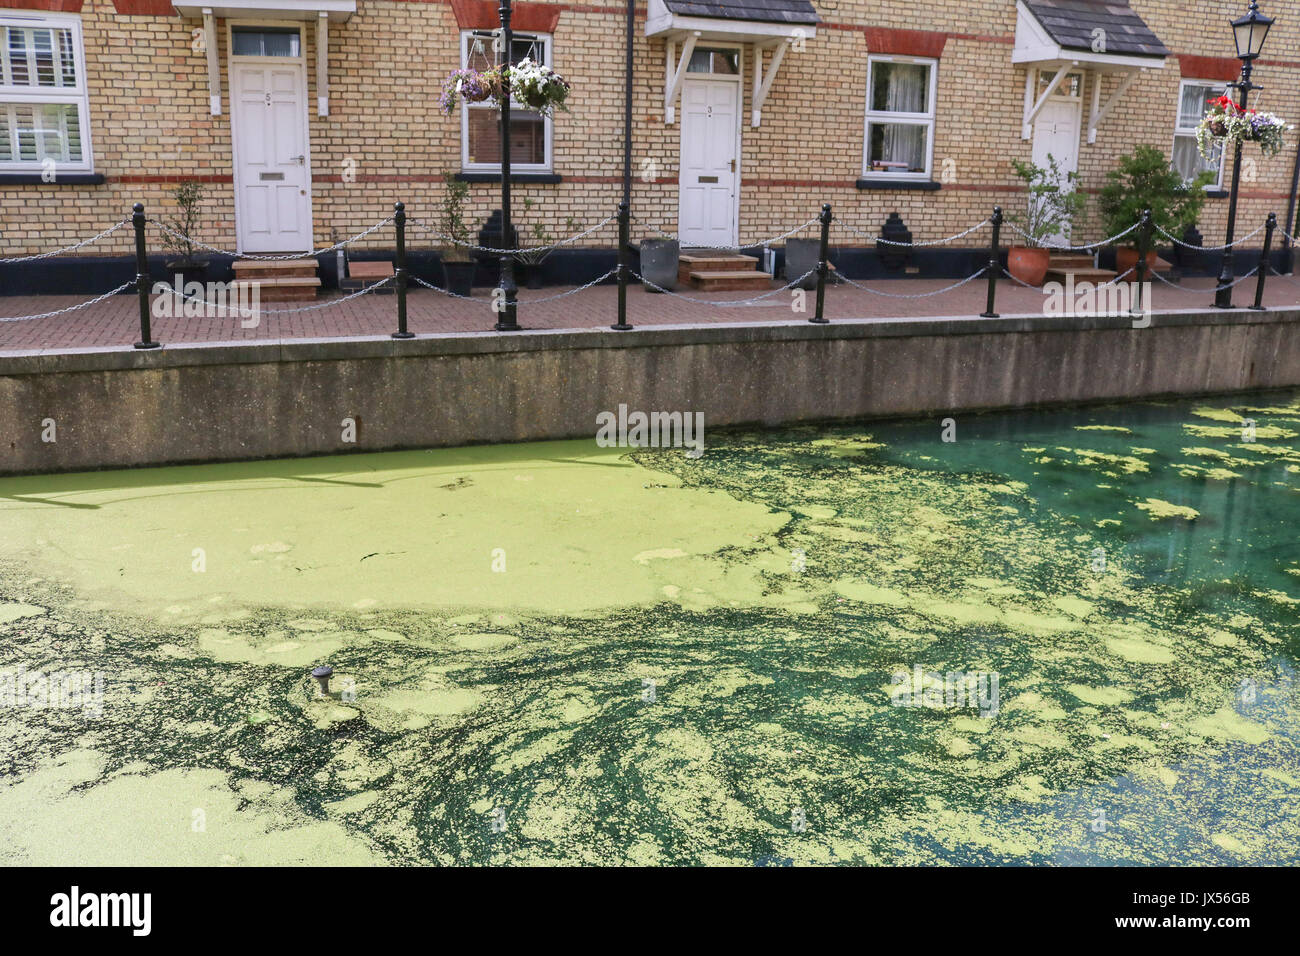 London 14th August 2017. Residential houses overlooking a canal in Limehouse east London covered in growing green algae due to the recent hot weather conditions Credit: amer ghazzal/Alamy Live News Stock Photo